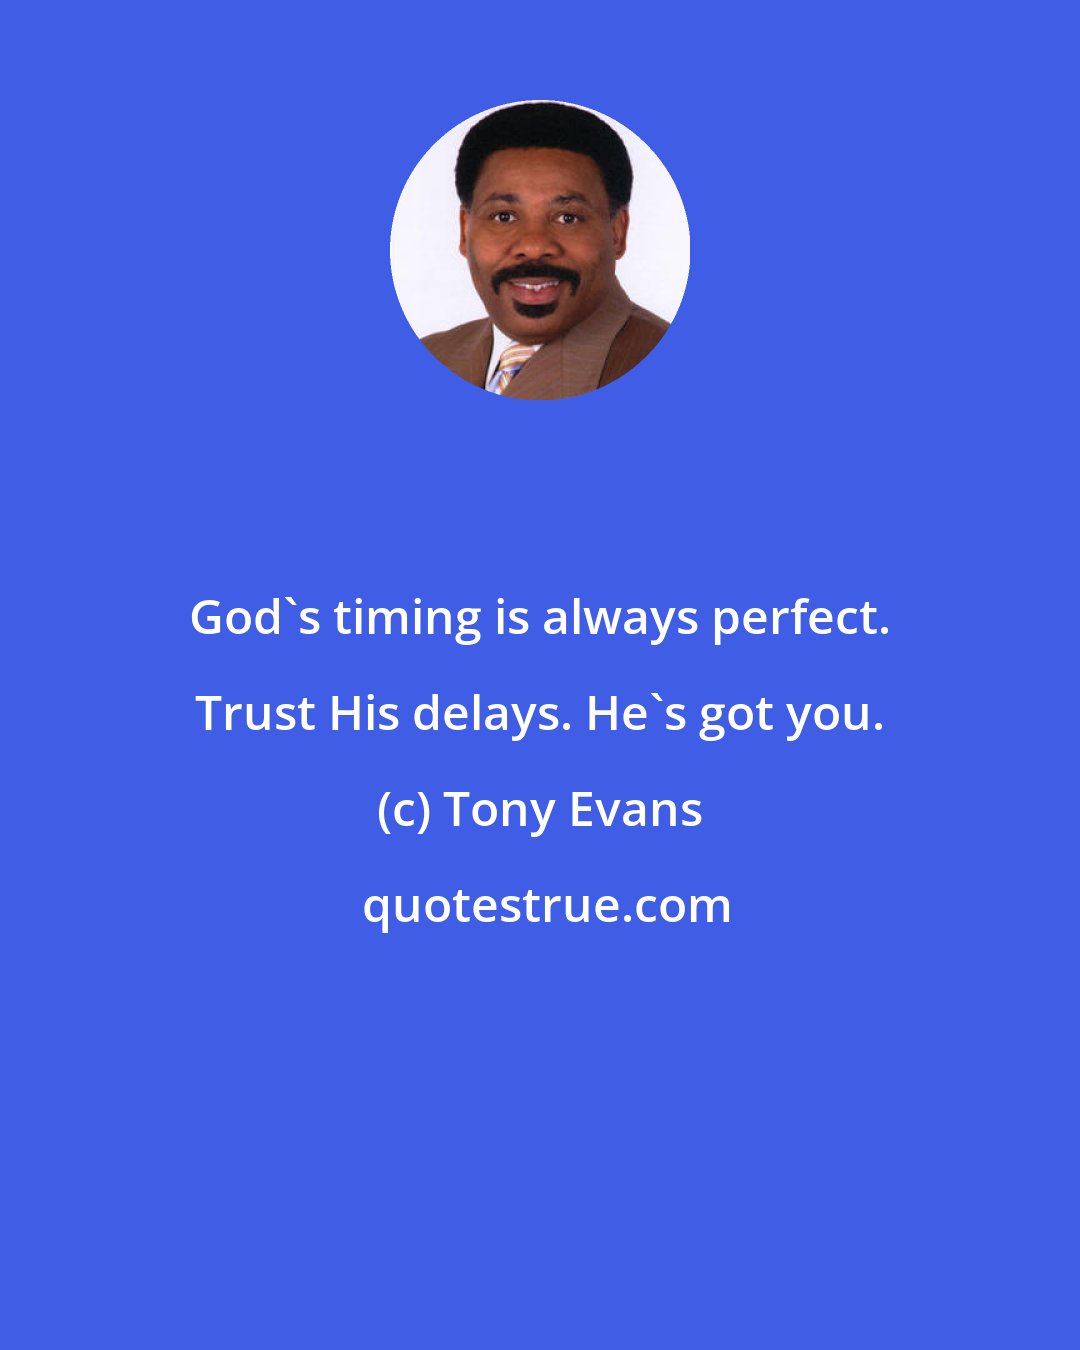 Tony Evans: God's timing is always perfect. Trust His delays. He's got you.